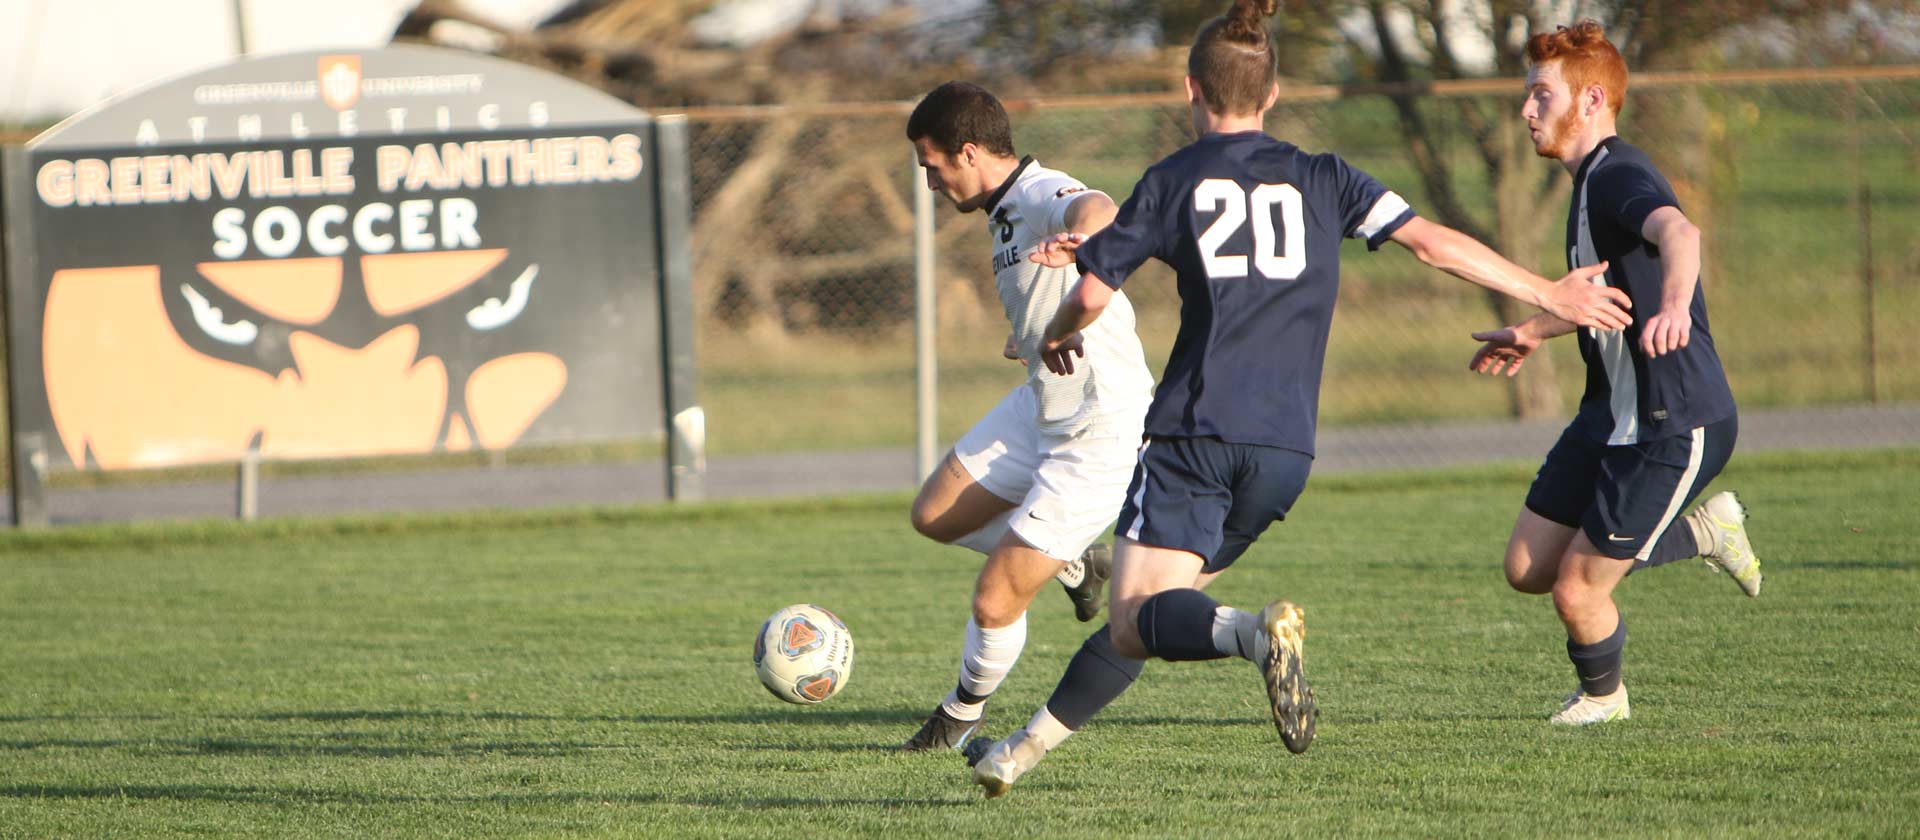 Men's soccer drops match to Webster with own goal